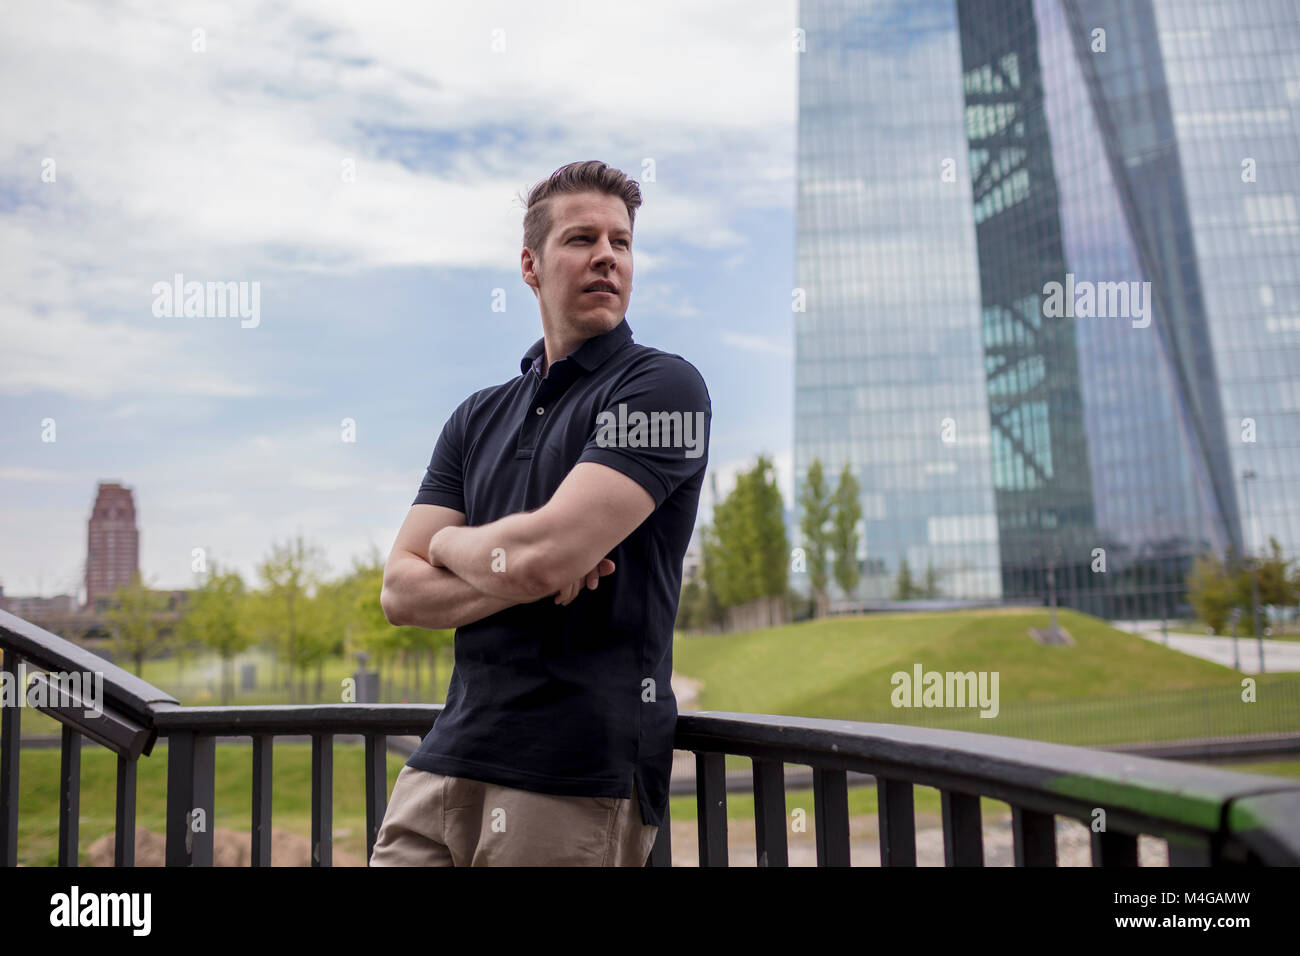 A man standing with his arms crossed leaning on a balustrade and a skyscraper building in the background. Stock Photo